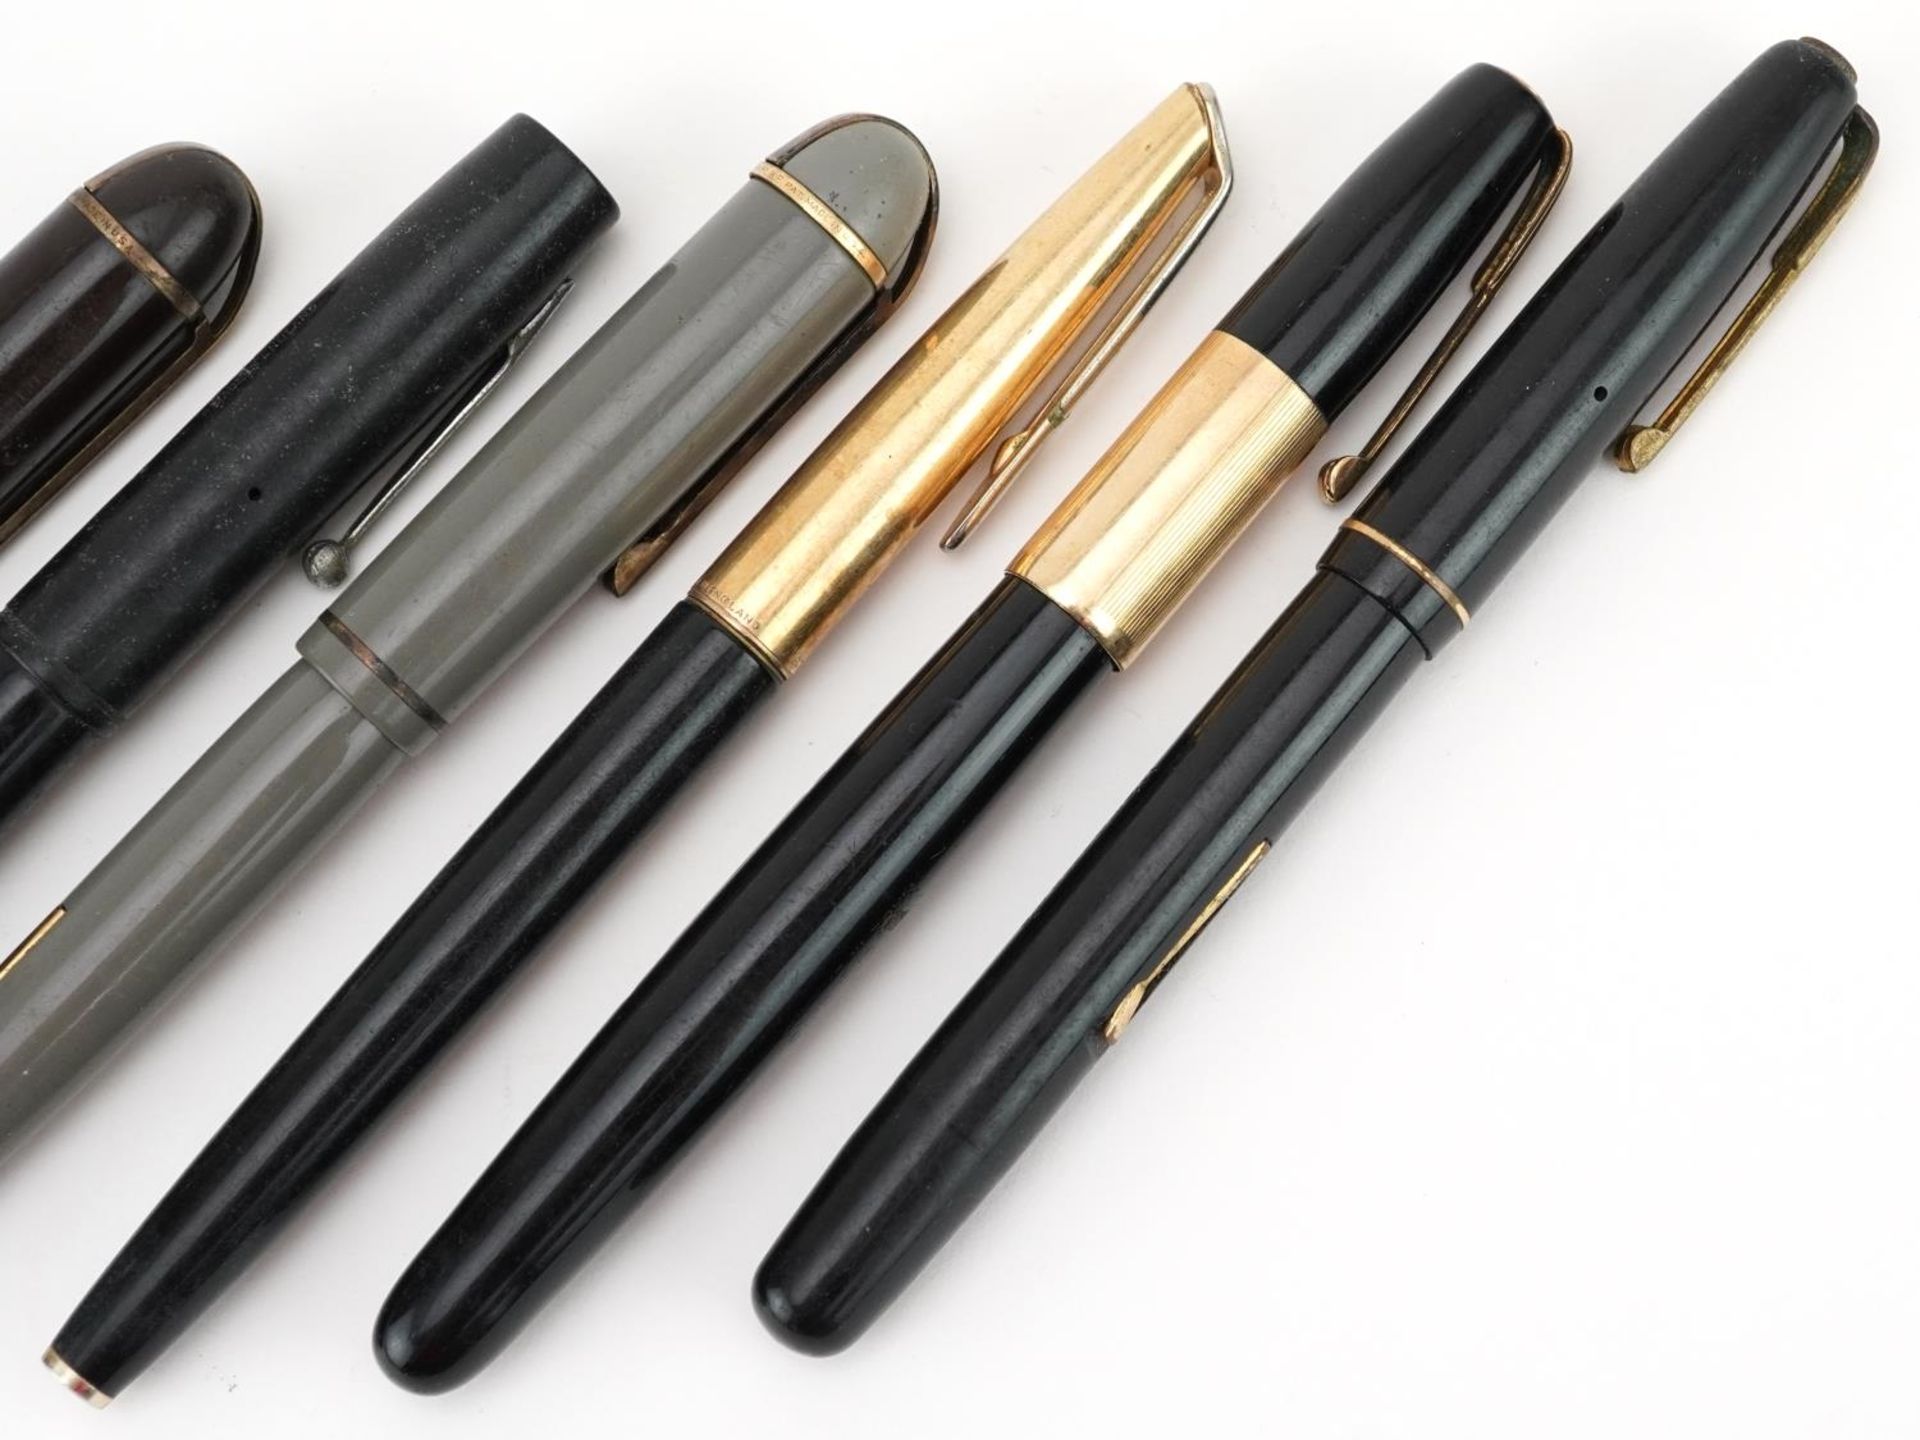 Four vintage Watermans fountain pens and two vintage Eversharp Skyline fountain pens, five with gold - Image 3 of 4